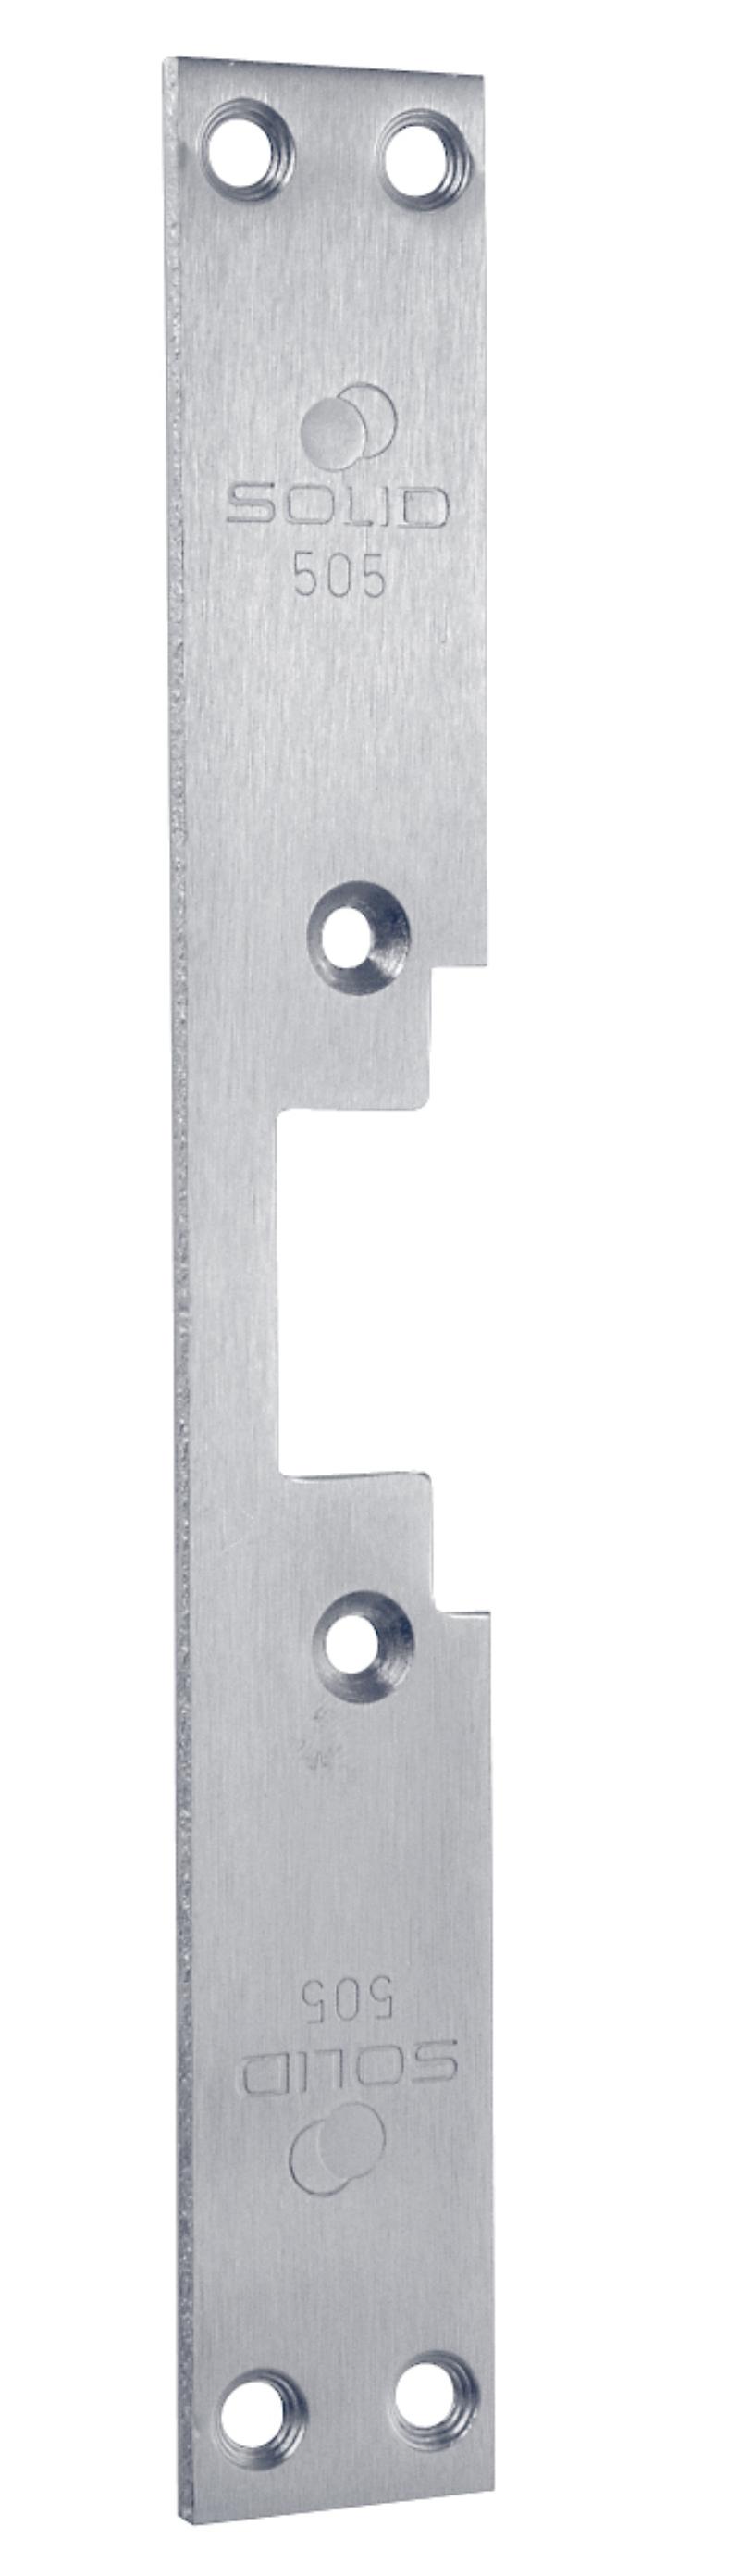 Solid post 505 t/electric end plate (971234)